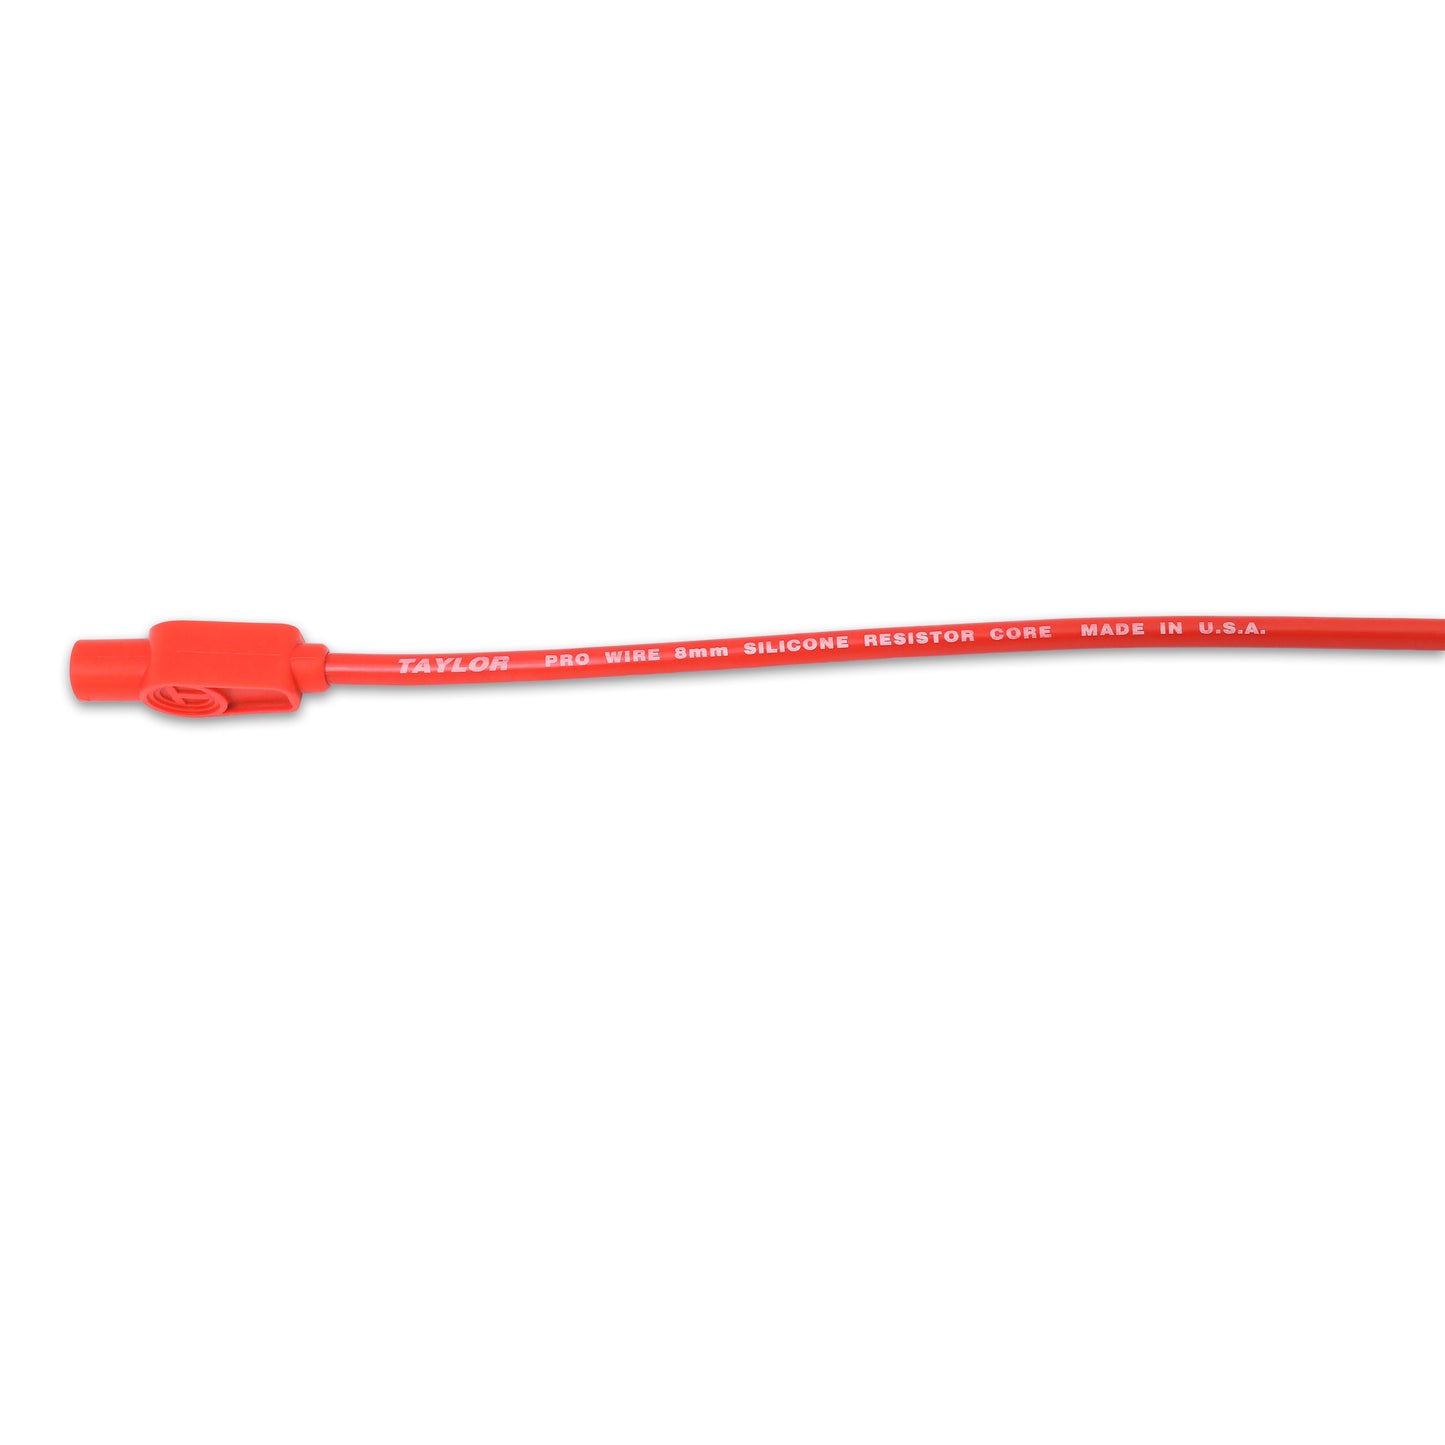 Taylor Cable 8mm 70245 Pro RC Ignition Wires univ 6 cyl 180 red